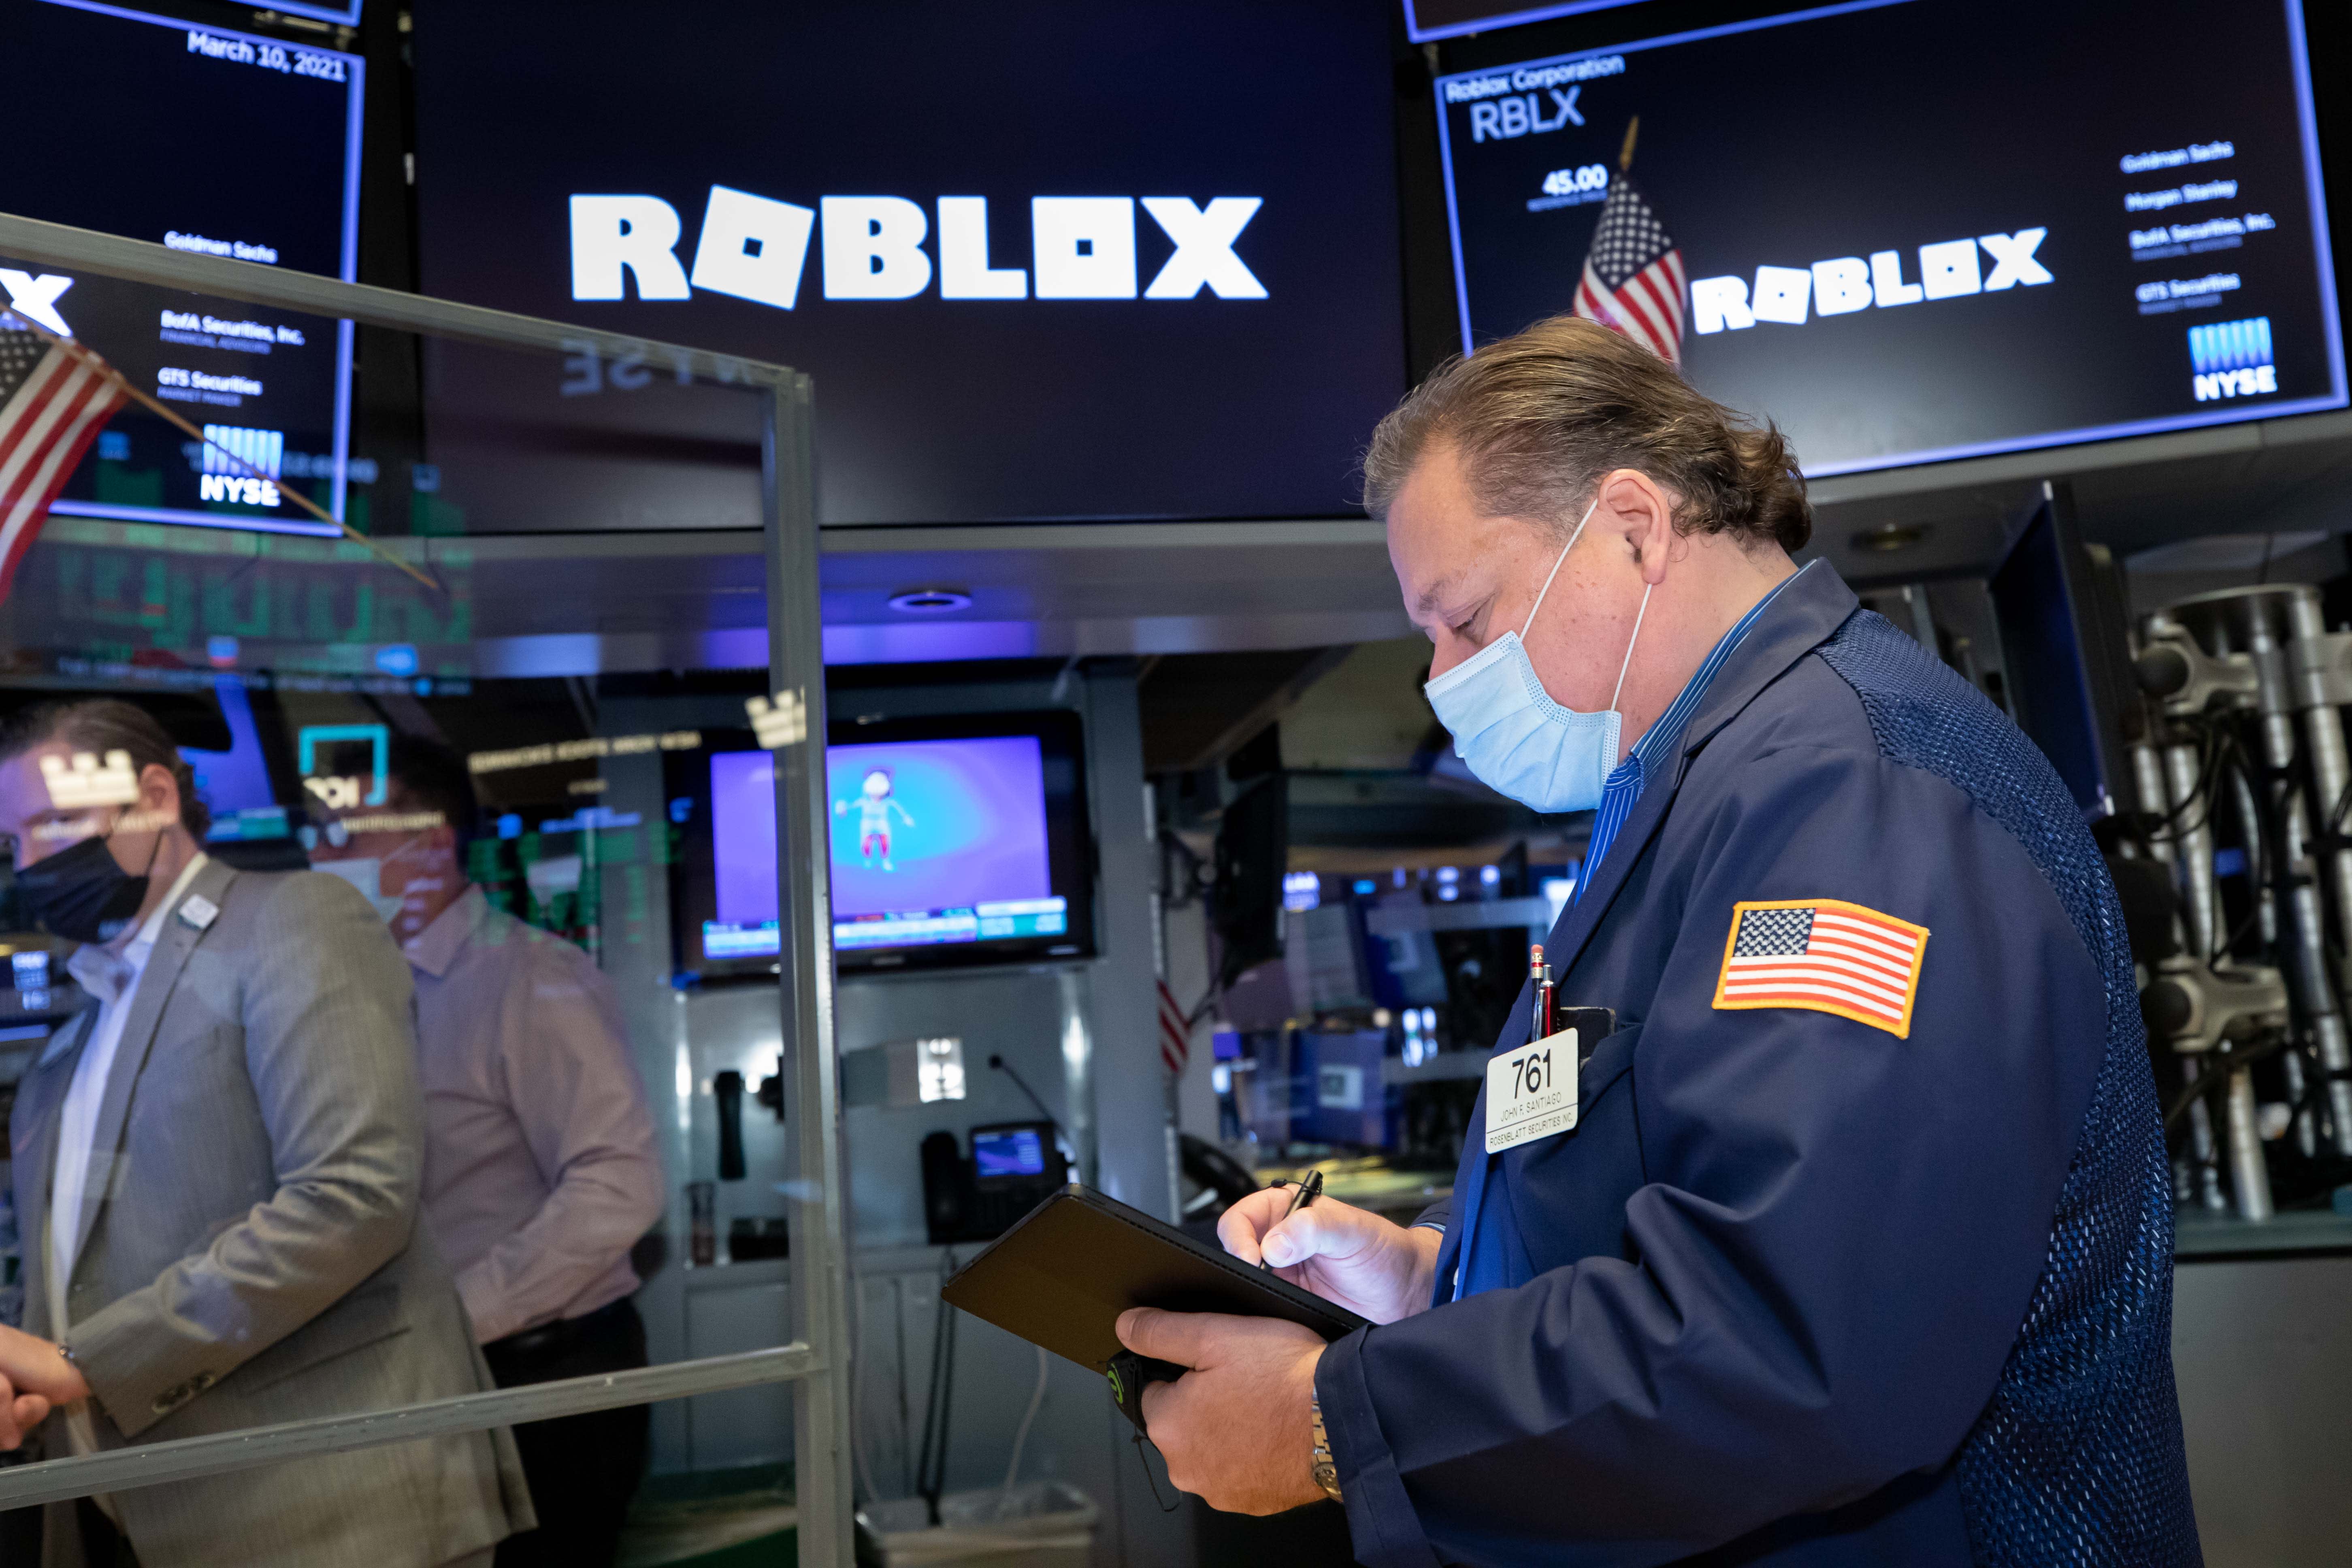 Roblox shares increase after the purchase of Cathie Wood’s fund on the first trading day